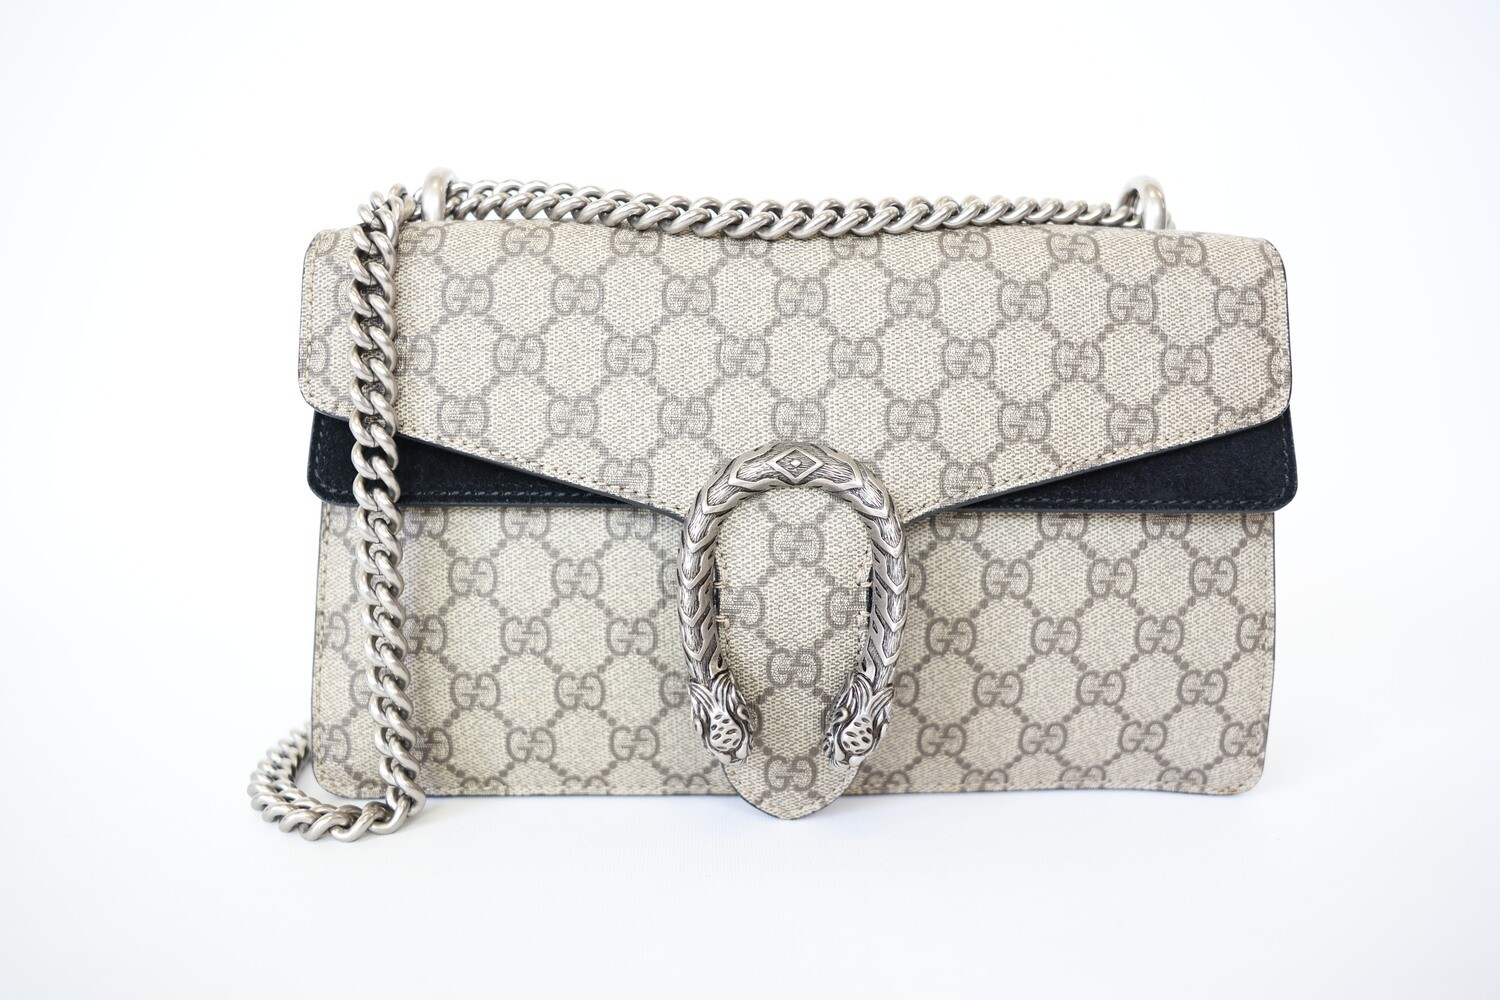 Gucci Dionysus Bag Small, Beige GG Coated Canvas, Preowned In Box WA001